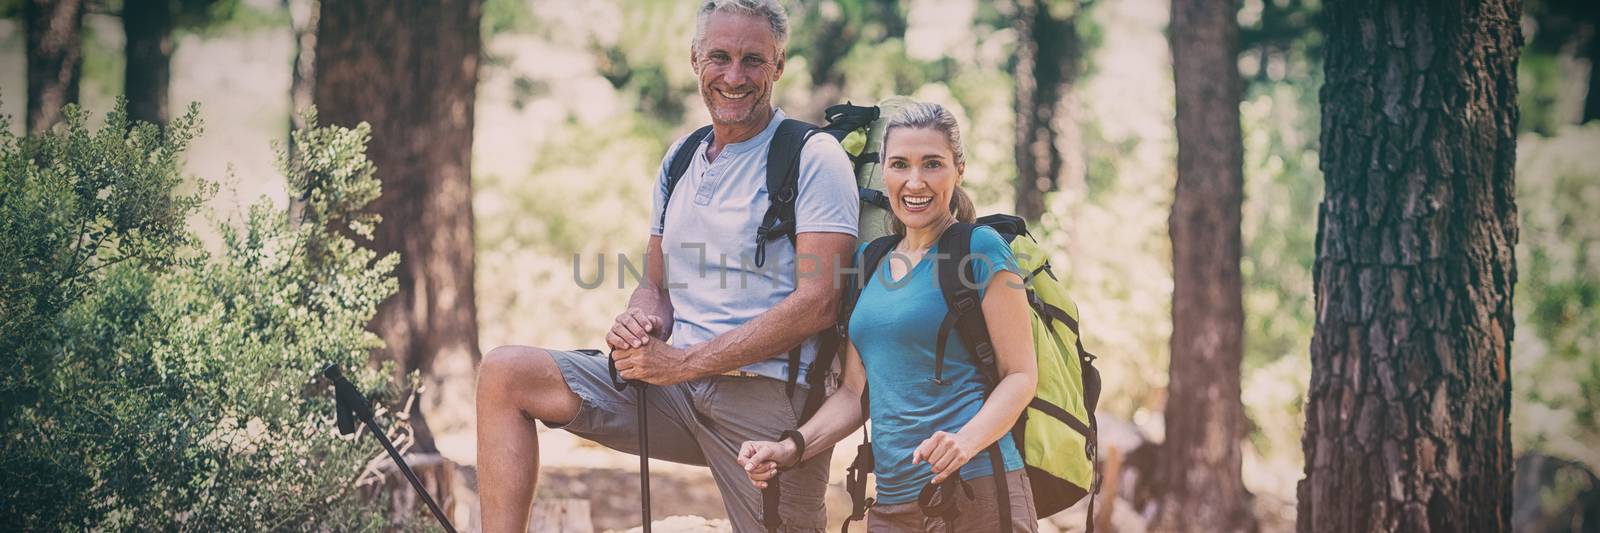 Couple smiling and posing during a hike on the wood 